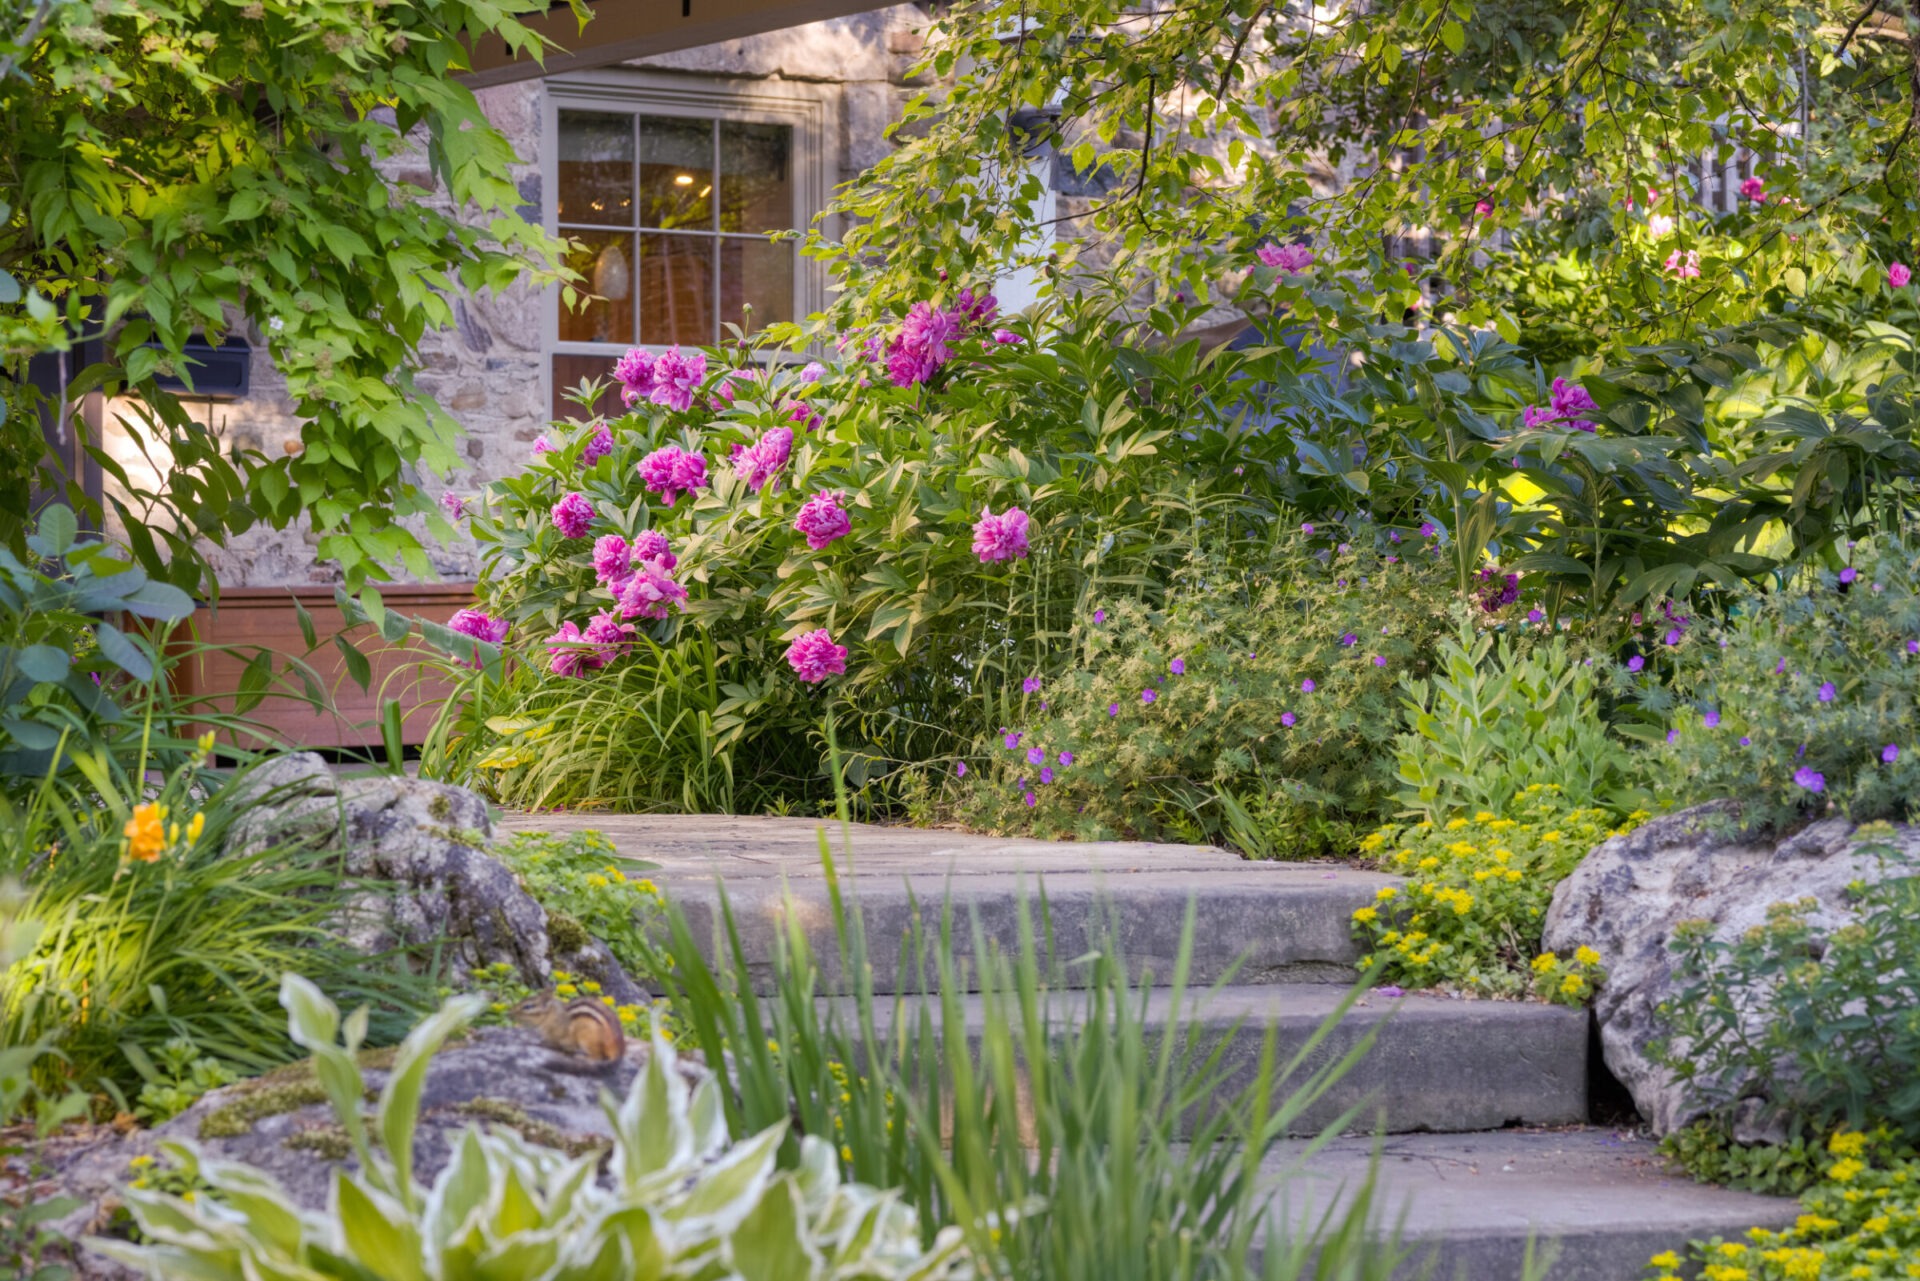 A lush garden with blooming pink peonies, stepping stones, and a variety of green plants in front of a stone house with windows reflecting sunlight.